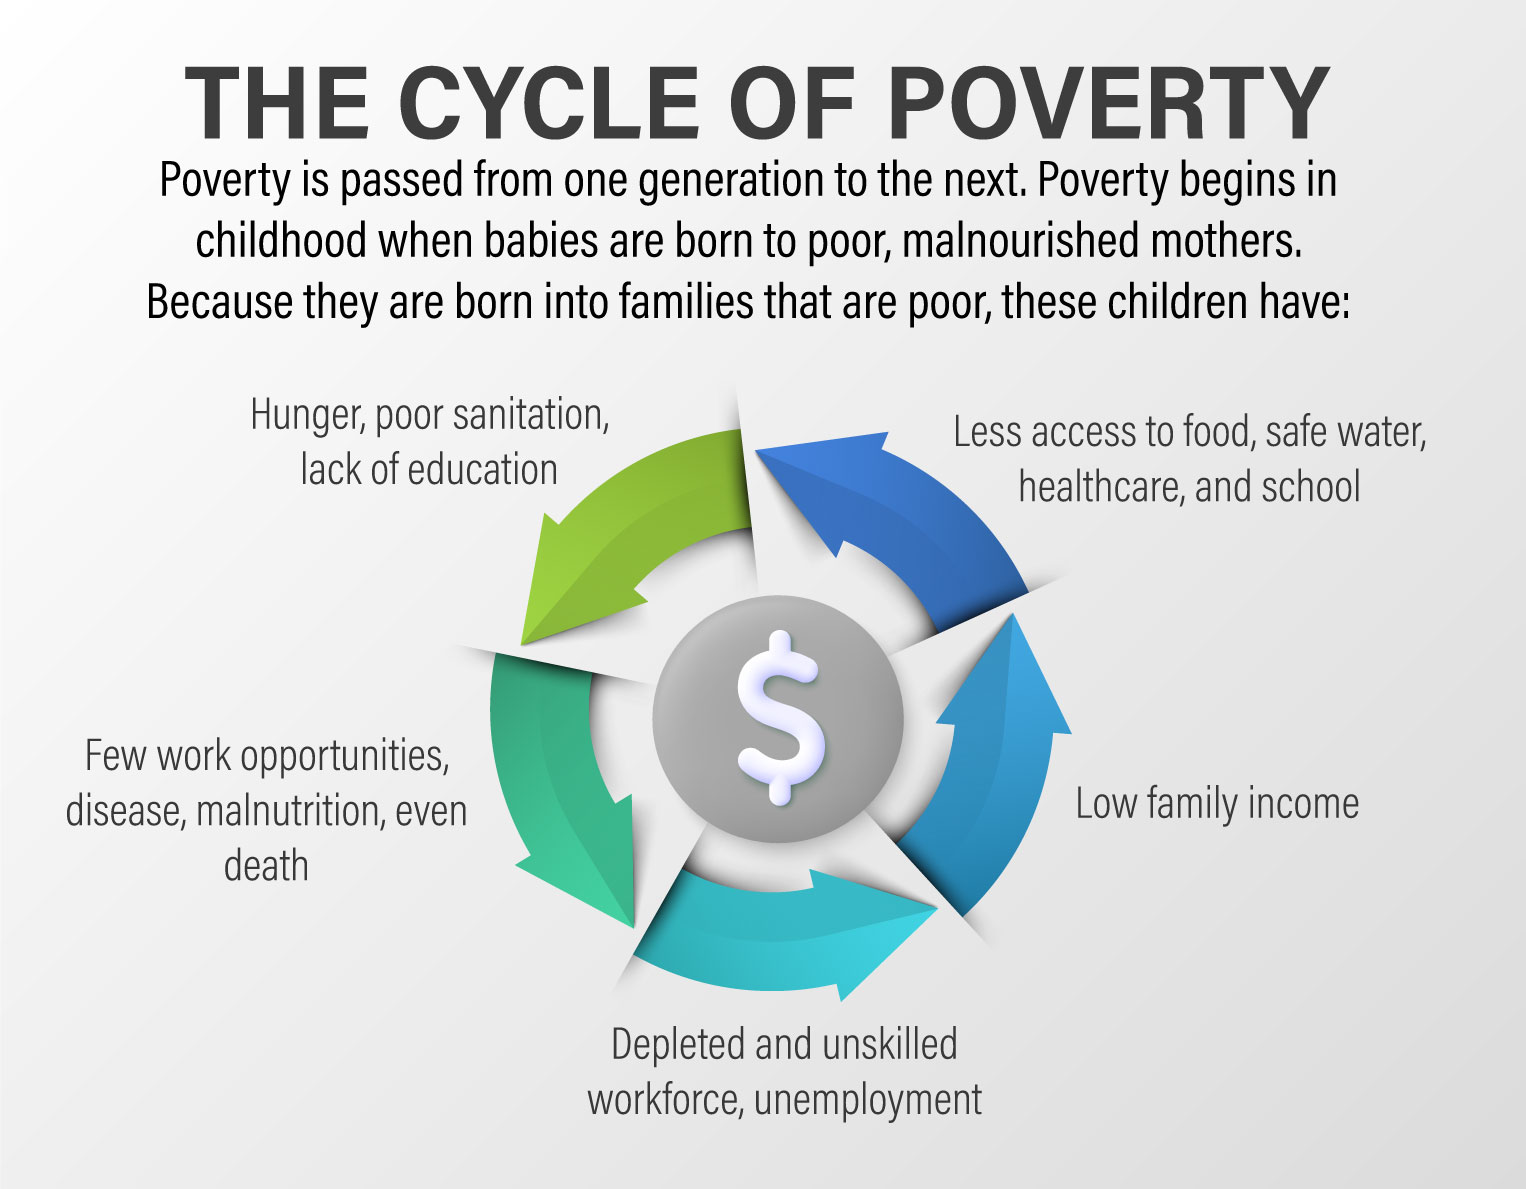 CYCLE OF POVERTY INFOGRAPHIC 